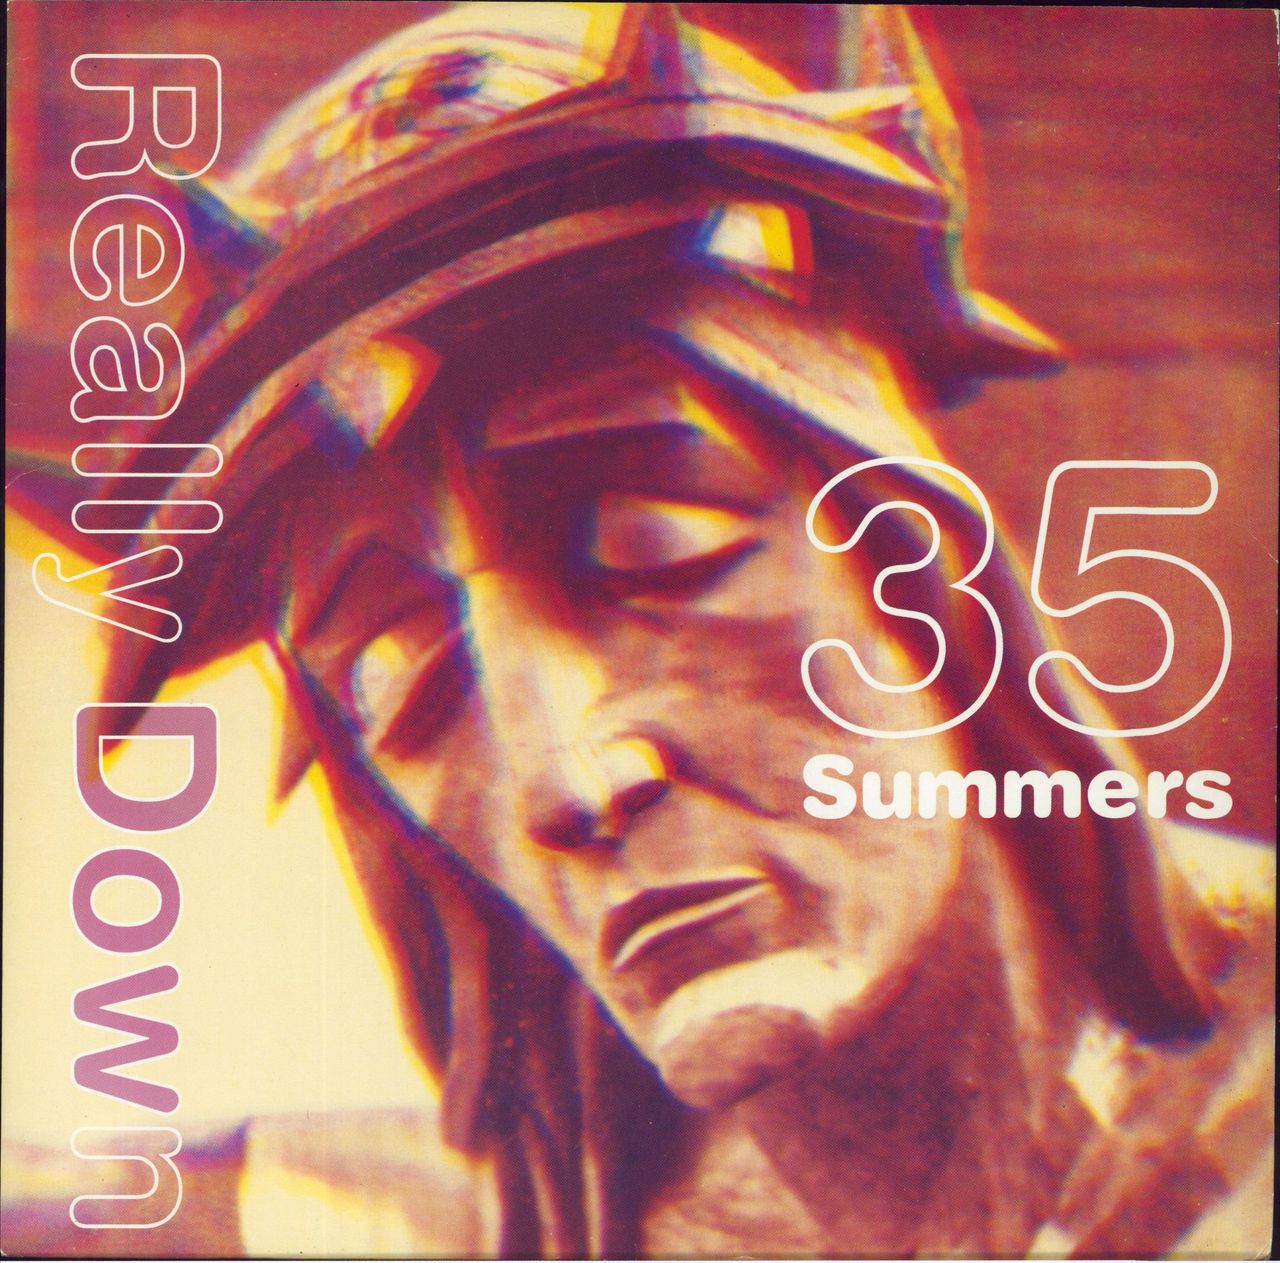 35 Summers